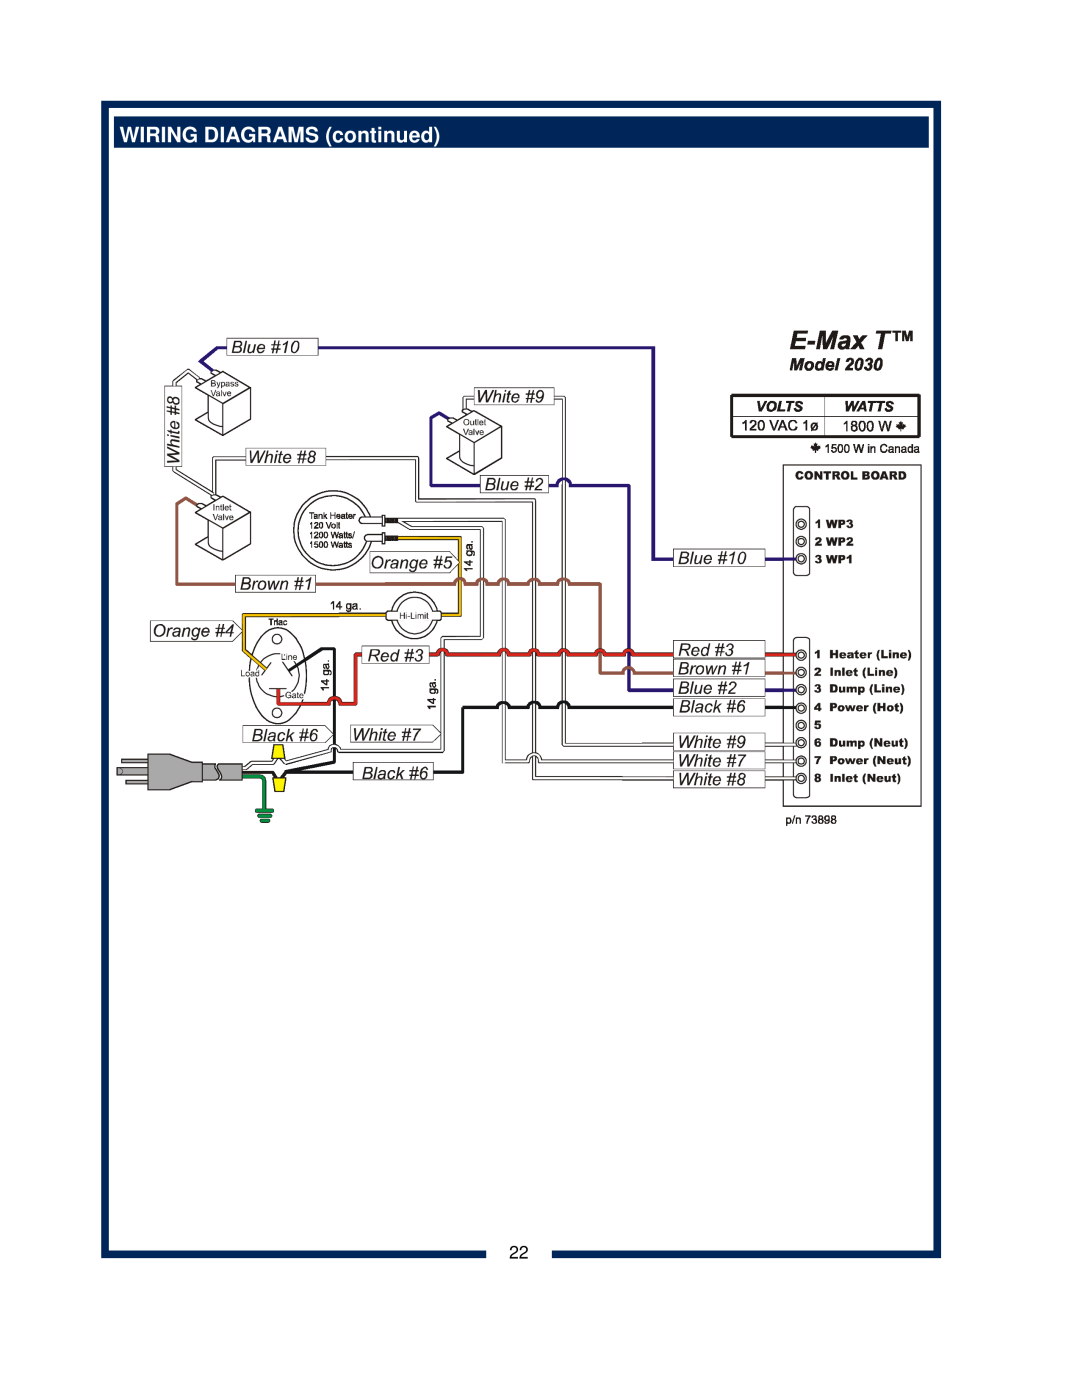 Bloomfield 2030 owner manual WIRING DIAGRAMS continued 